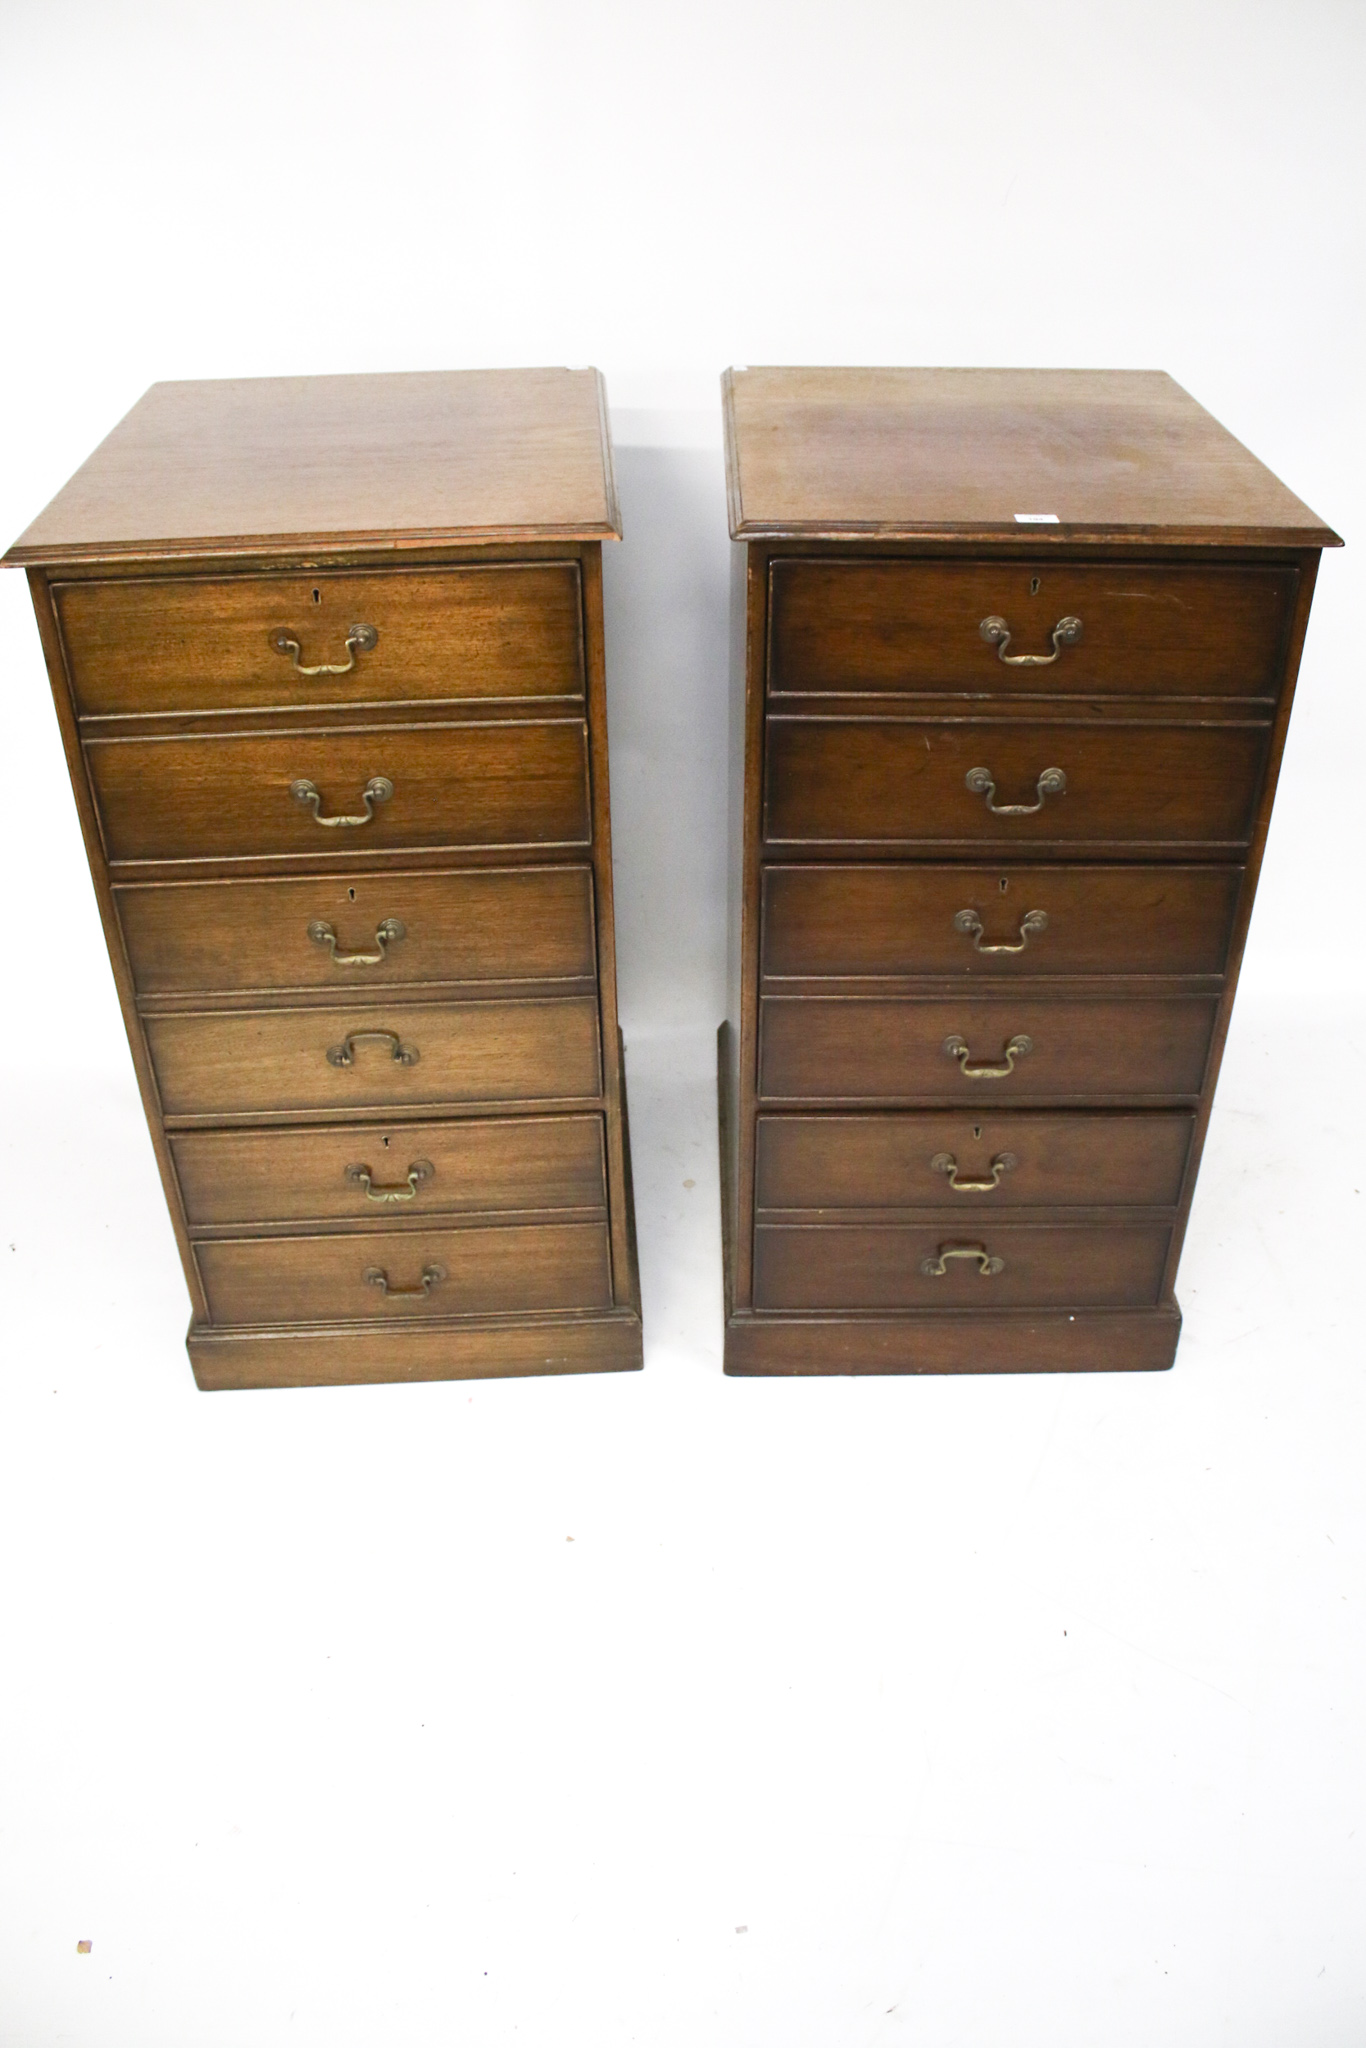 A pair of reproduction Georgian style wooden filing cabinets.